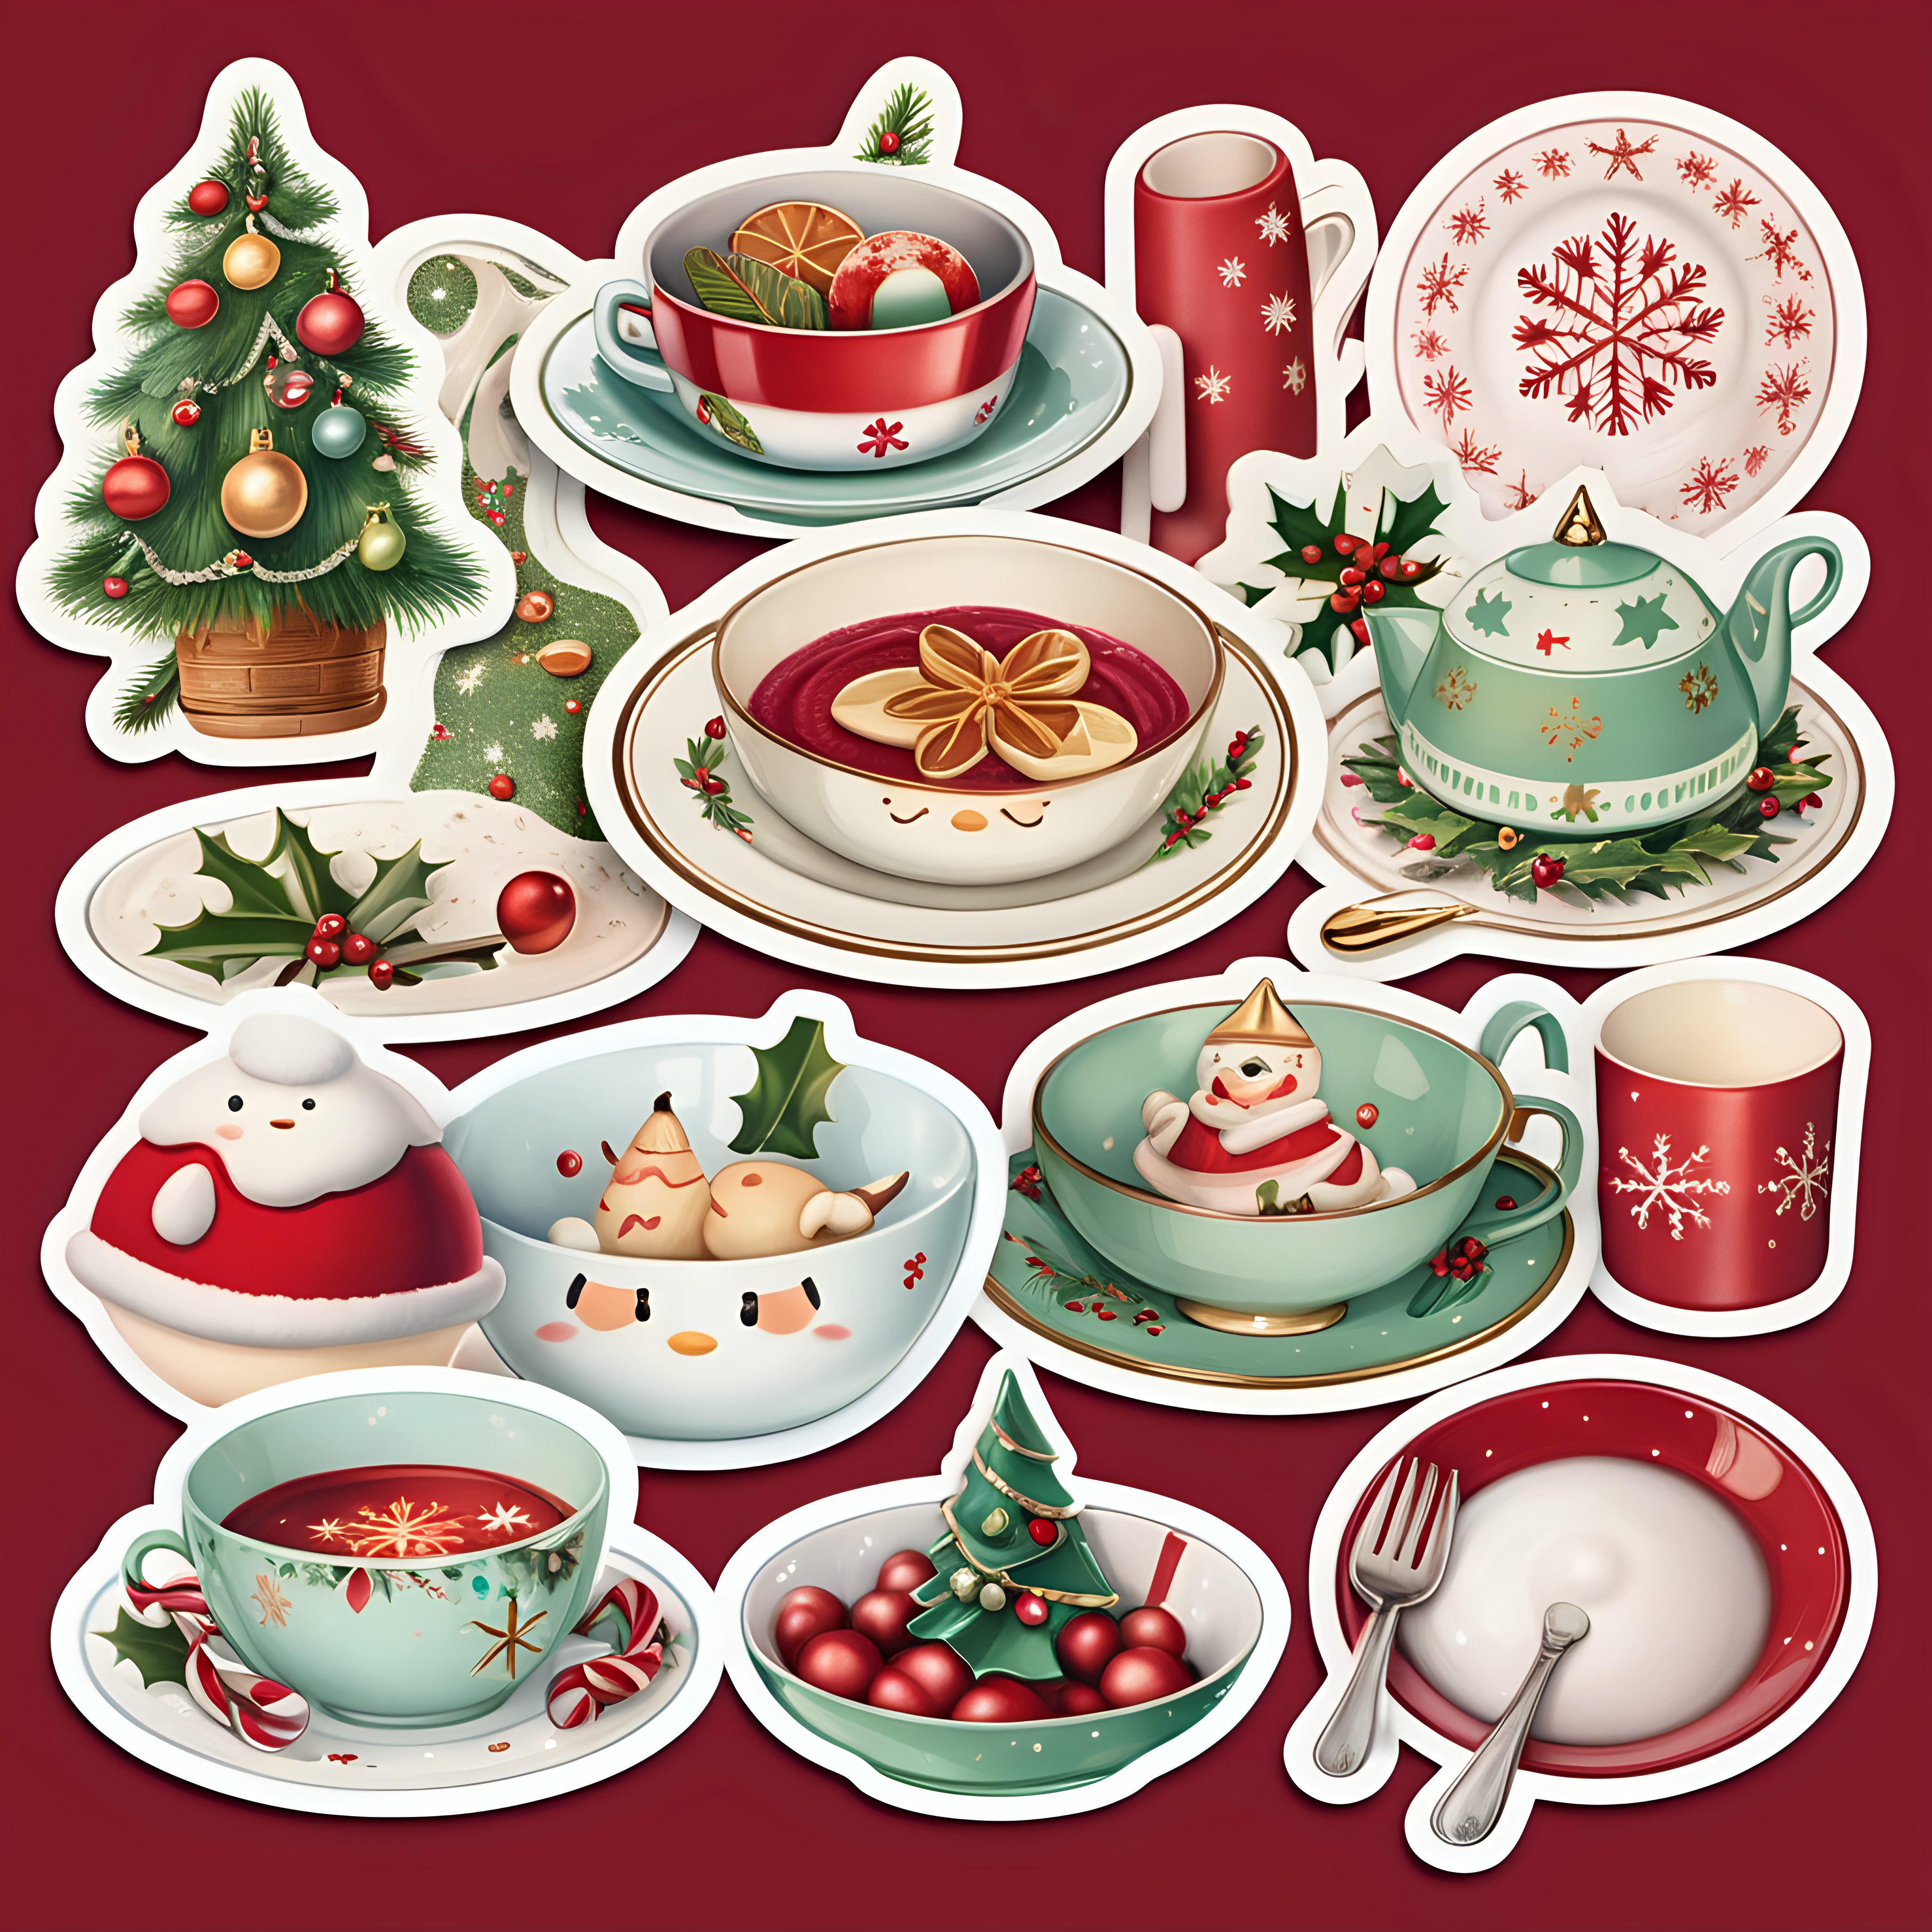 Christmas dishes sticker